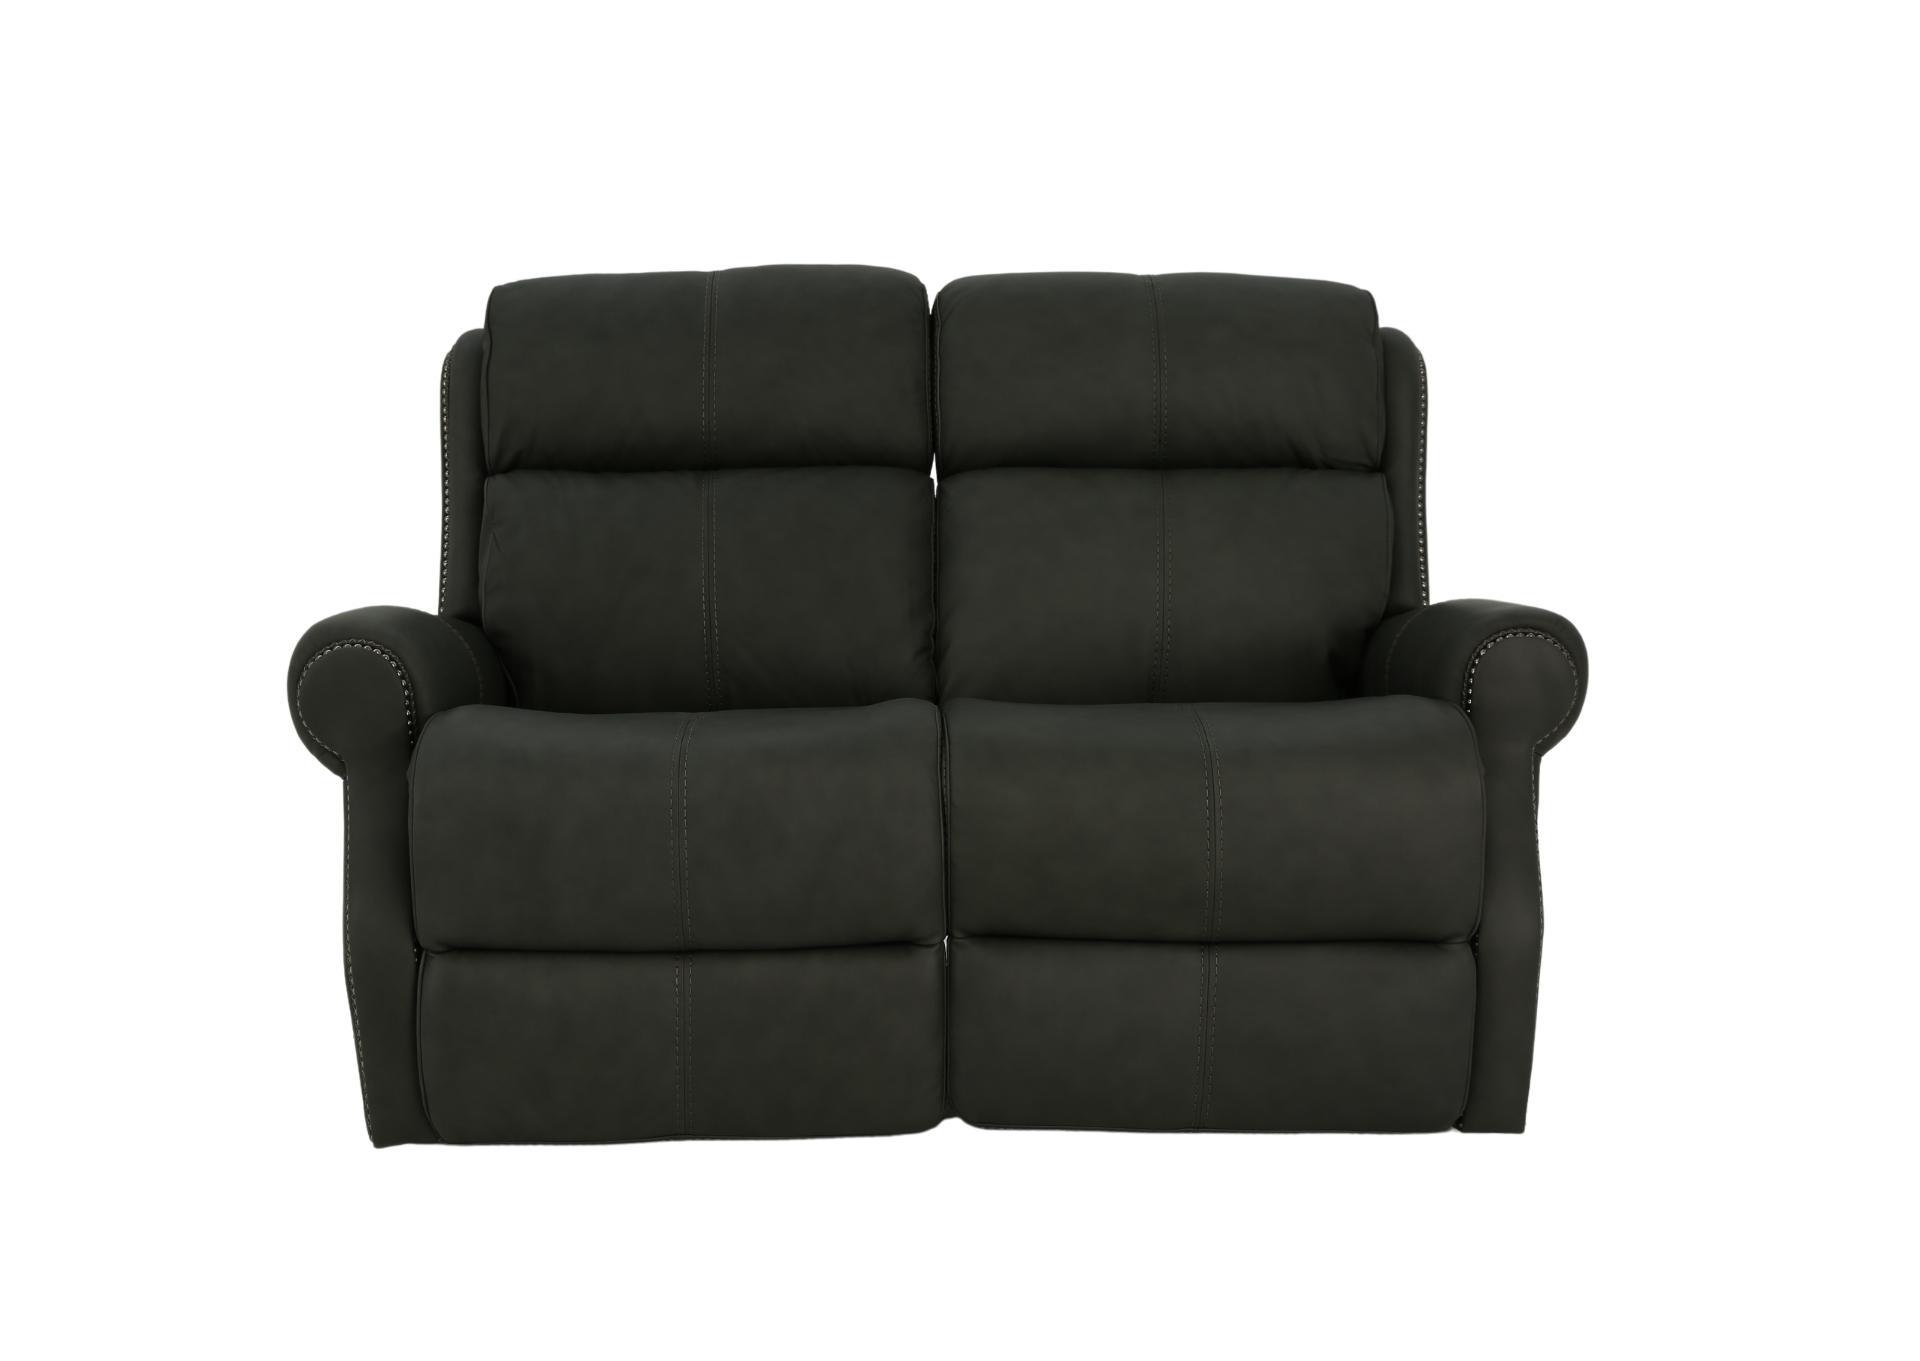 MCGWIRE GRAY LEATHER POWER LOVESEAT